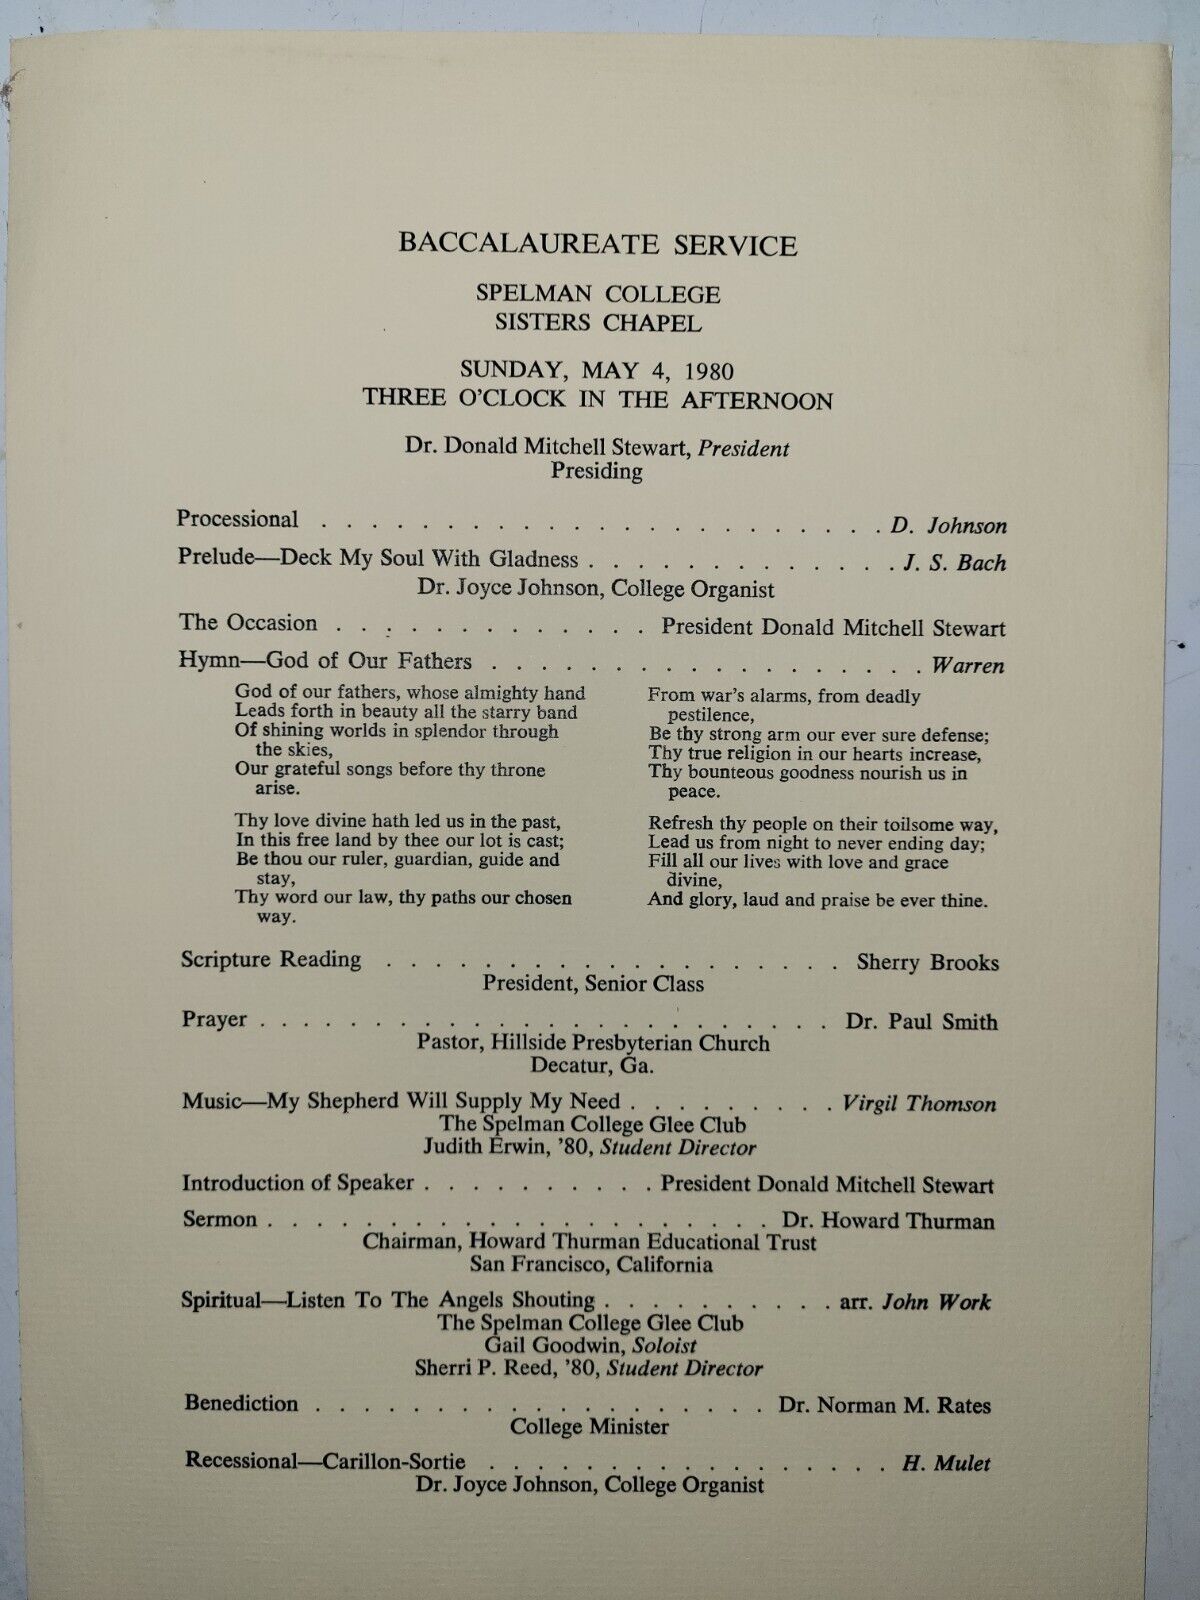 Rare 1980 Spelman College Baccalaureate Service Bulletin With Dr. Howard Thurman